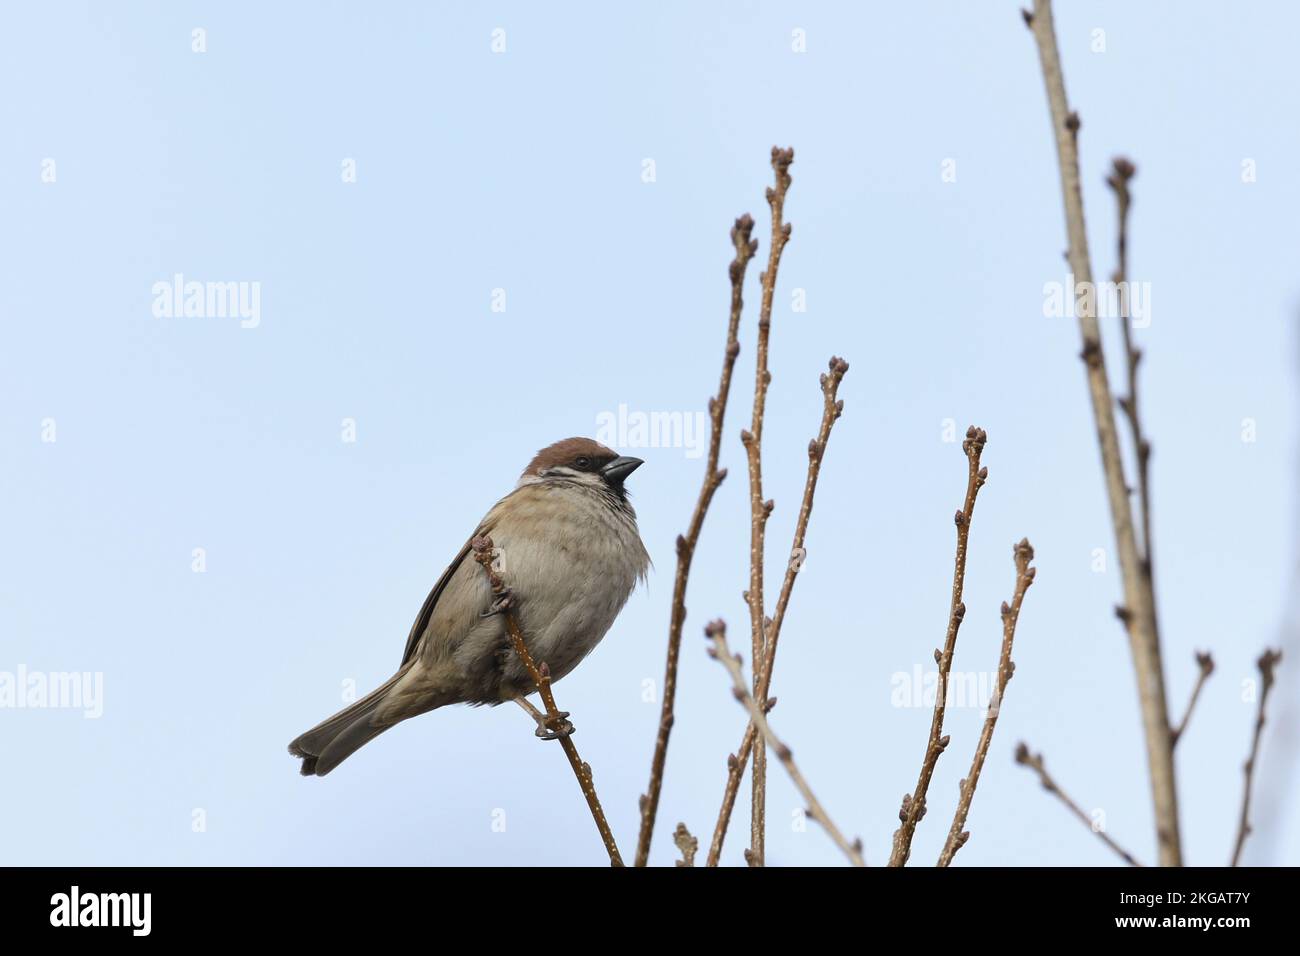 A sparrow perched on a branch. Stock Photo